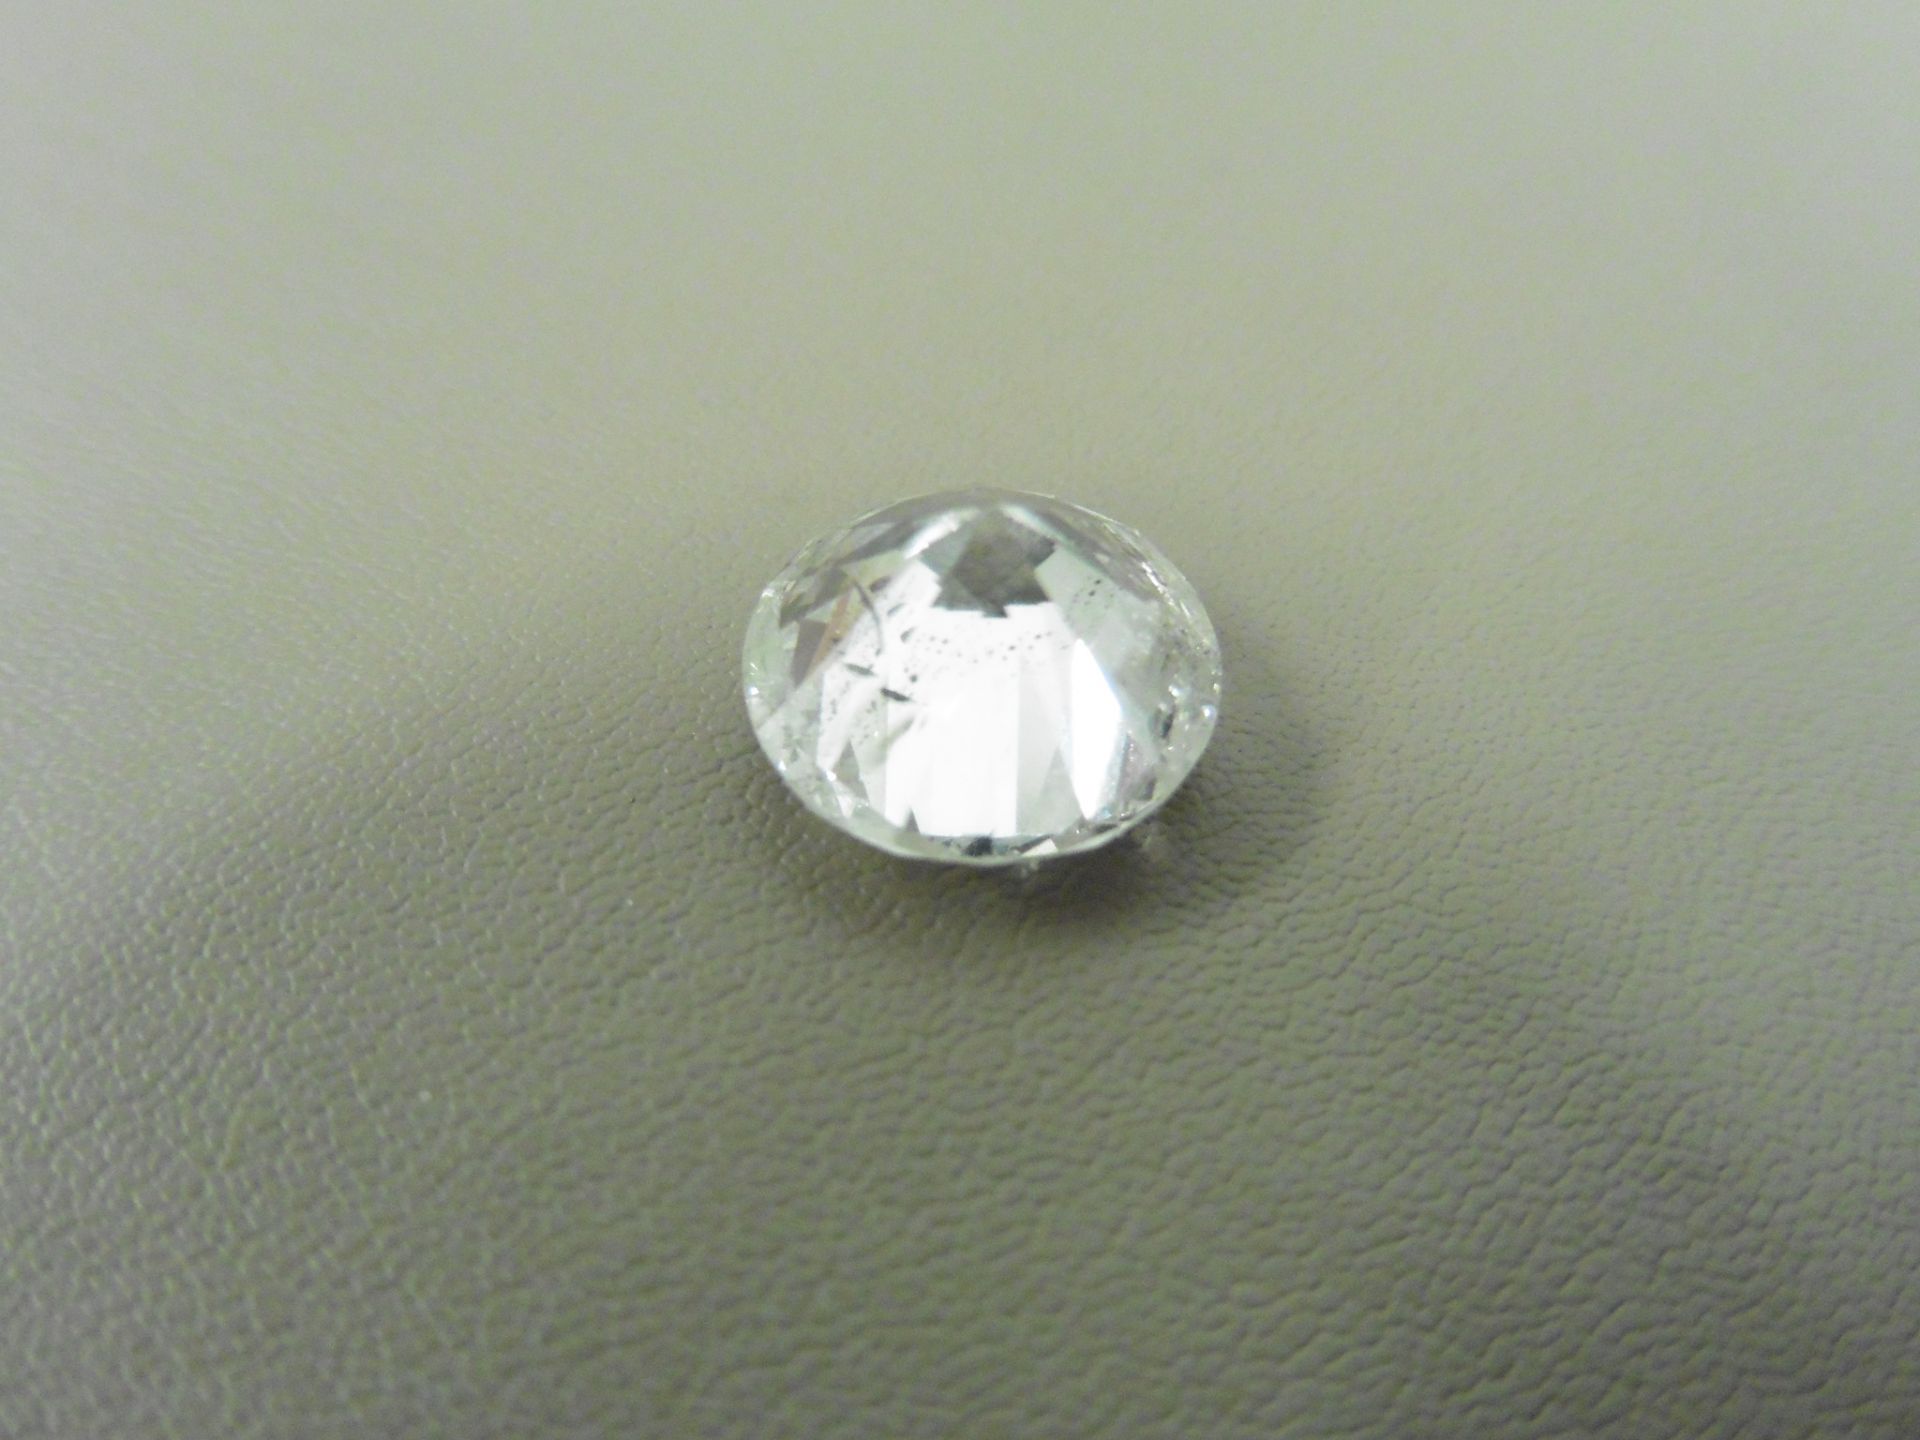 5.04ct natural loose briliant cut diamond. F colour and Il clarity. EGL certification. Valued at £ - Image 4 of 5